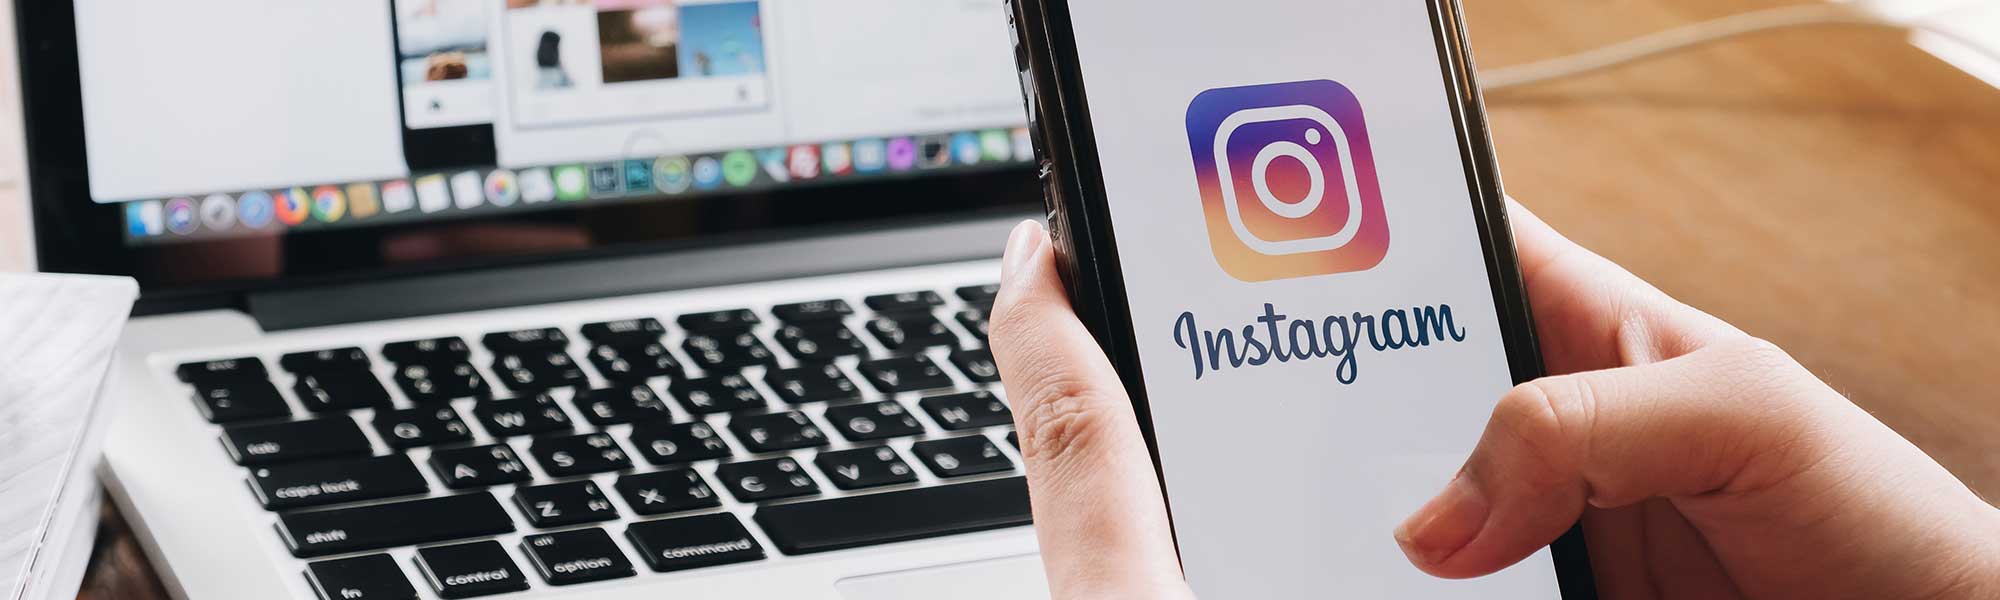 3 New Instagram Features We’re Excited To Try